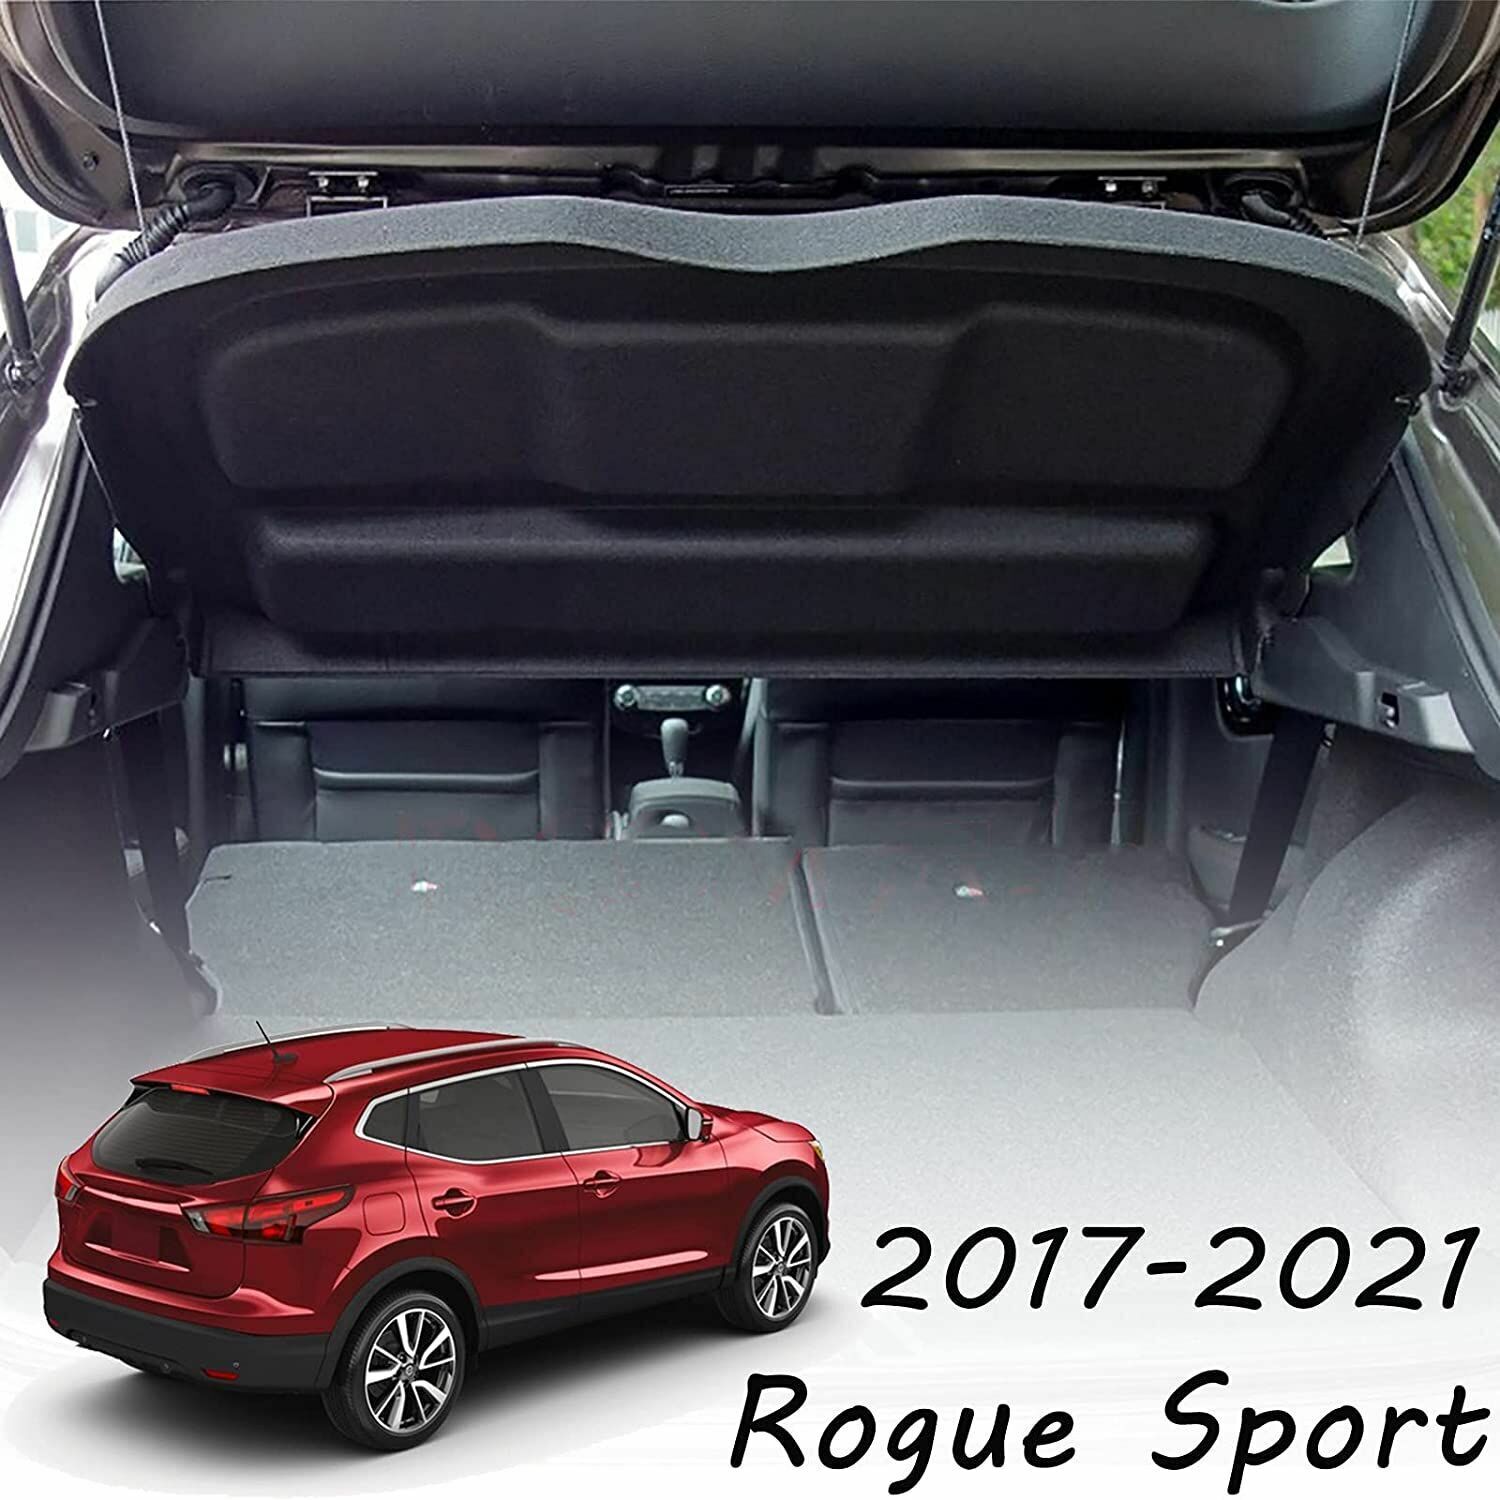 FOR 2017-2022 Nissan Rogue Sport PARCEL SHELF SECURITY CARGO COVER TRUNK SHIELD